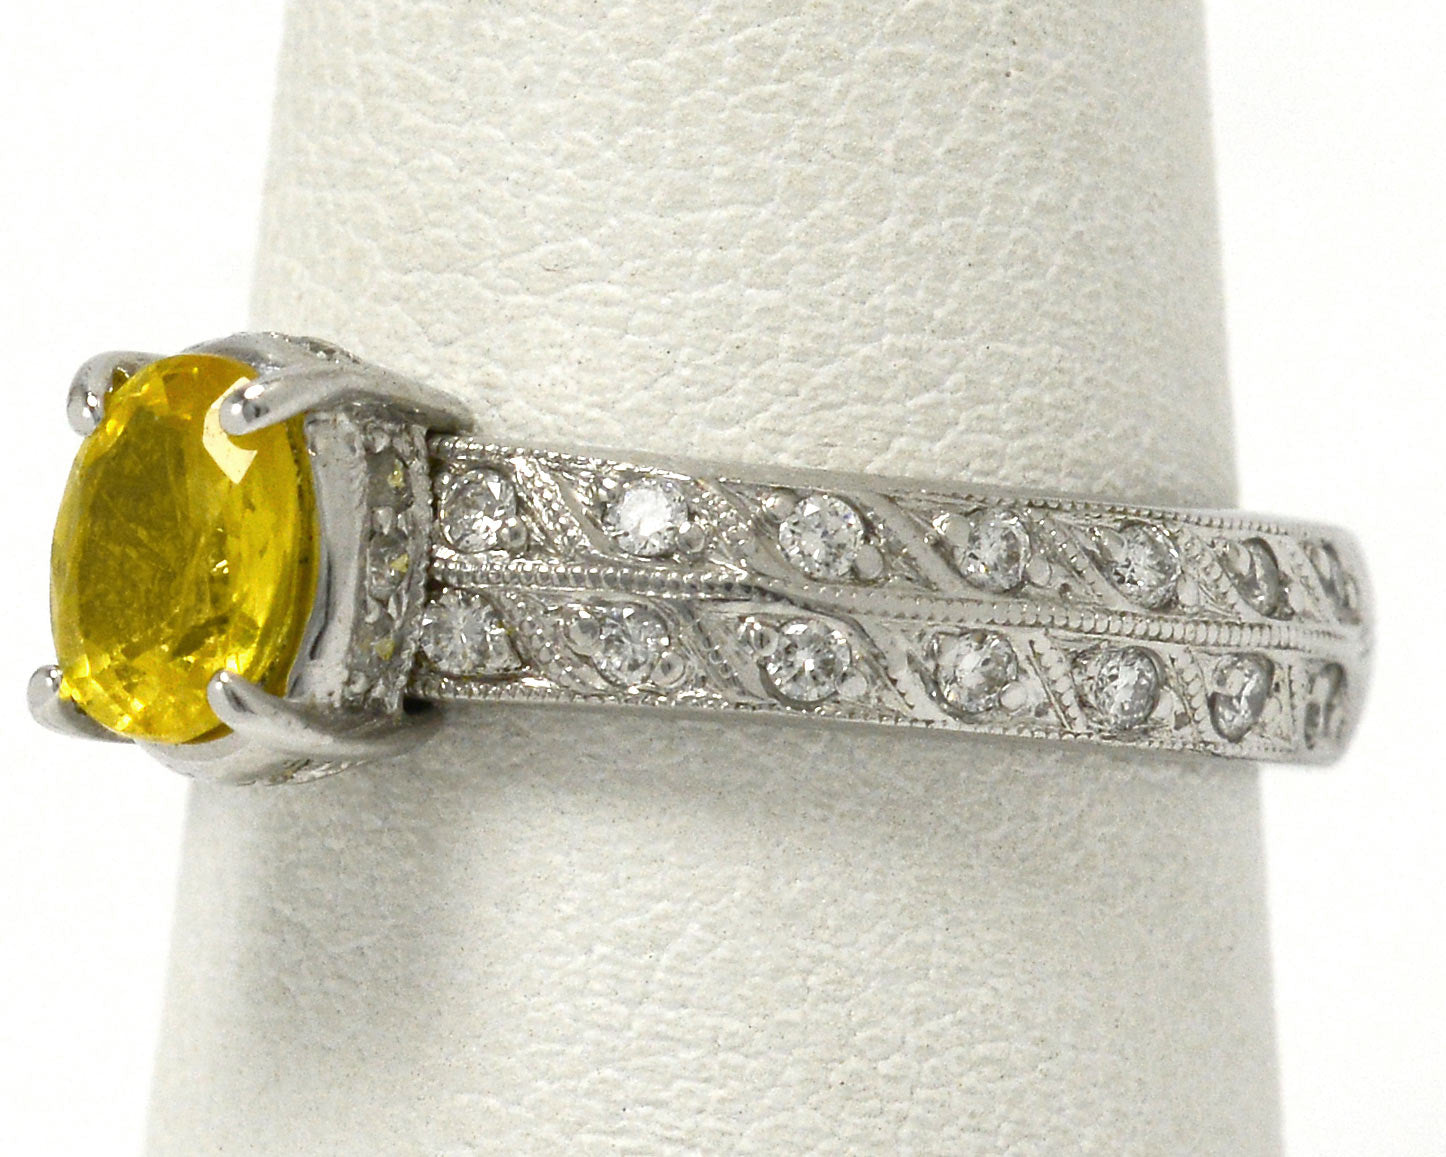 At nearly 1 carat, this golden yellow sapphire is secured by 4 prongs in this band.